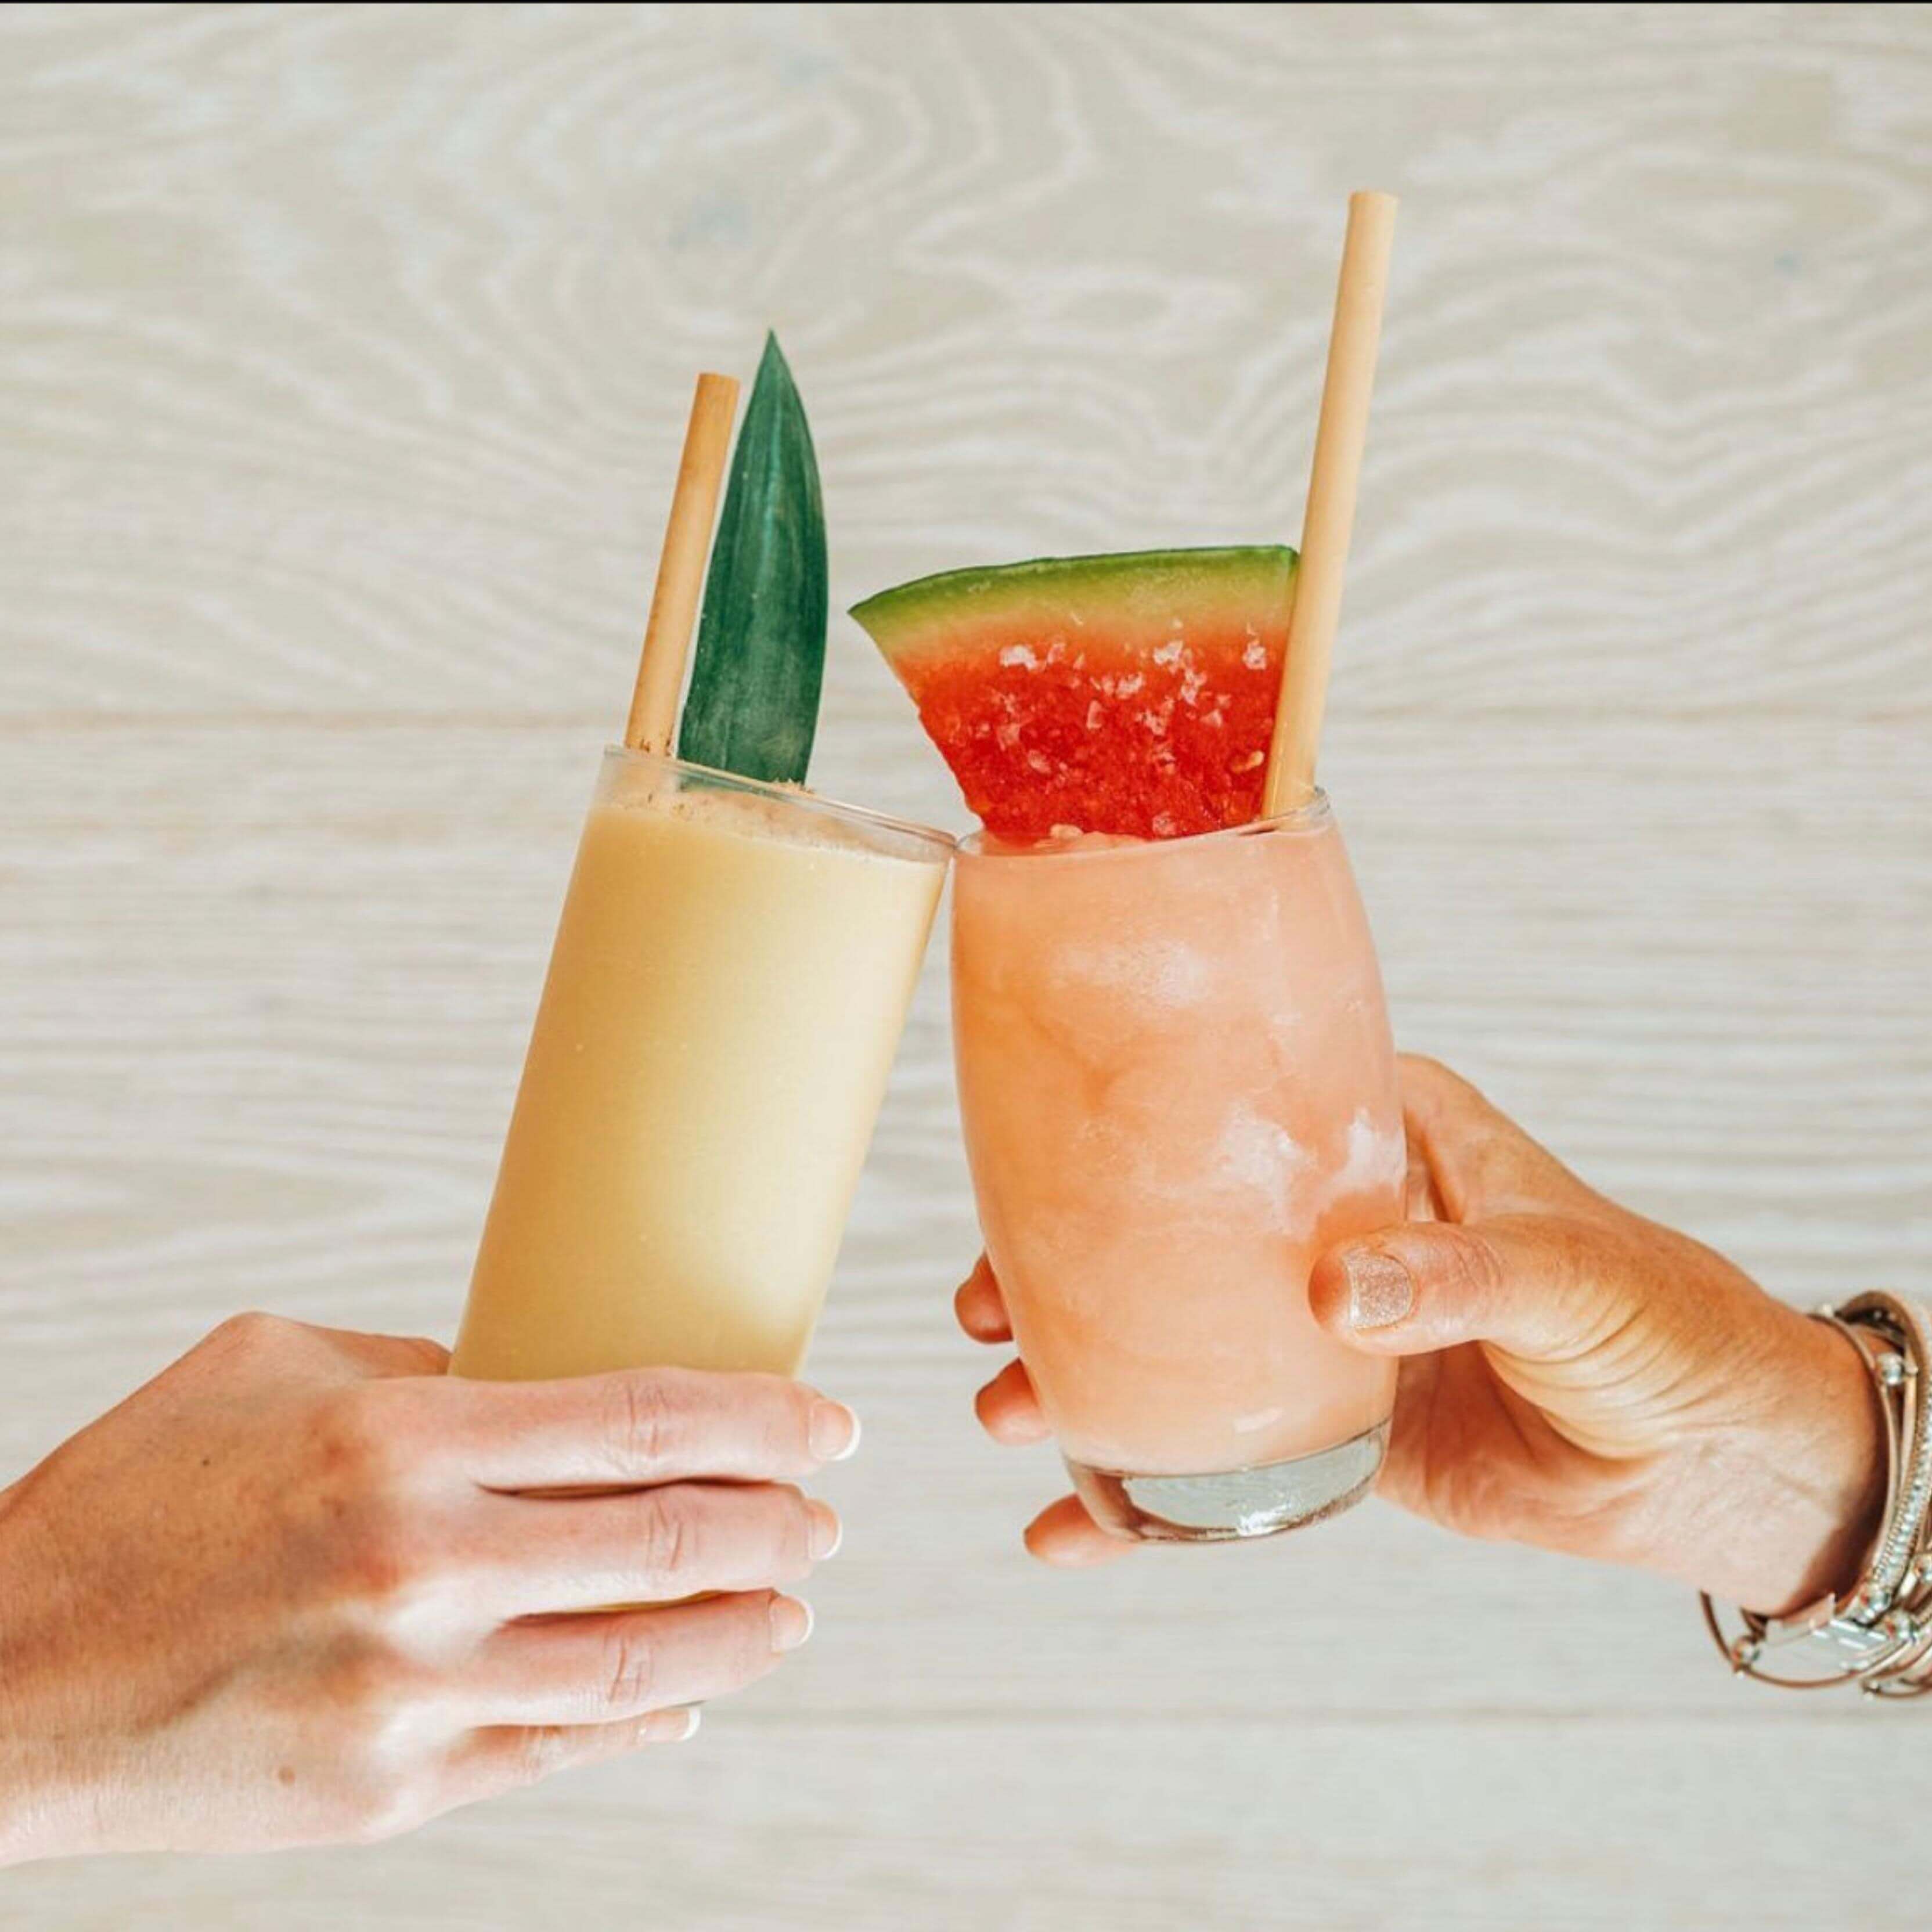 Two people are toasting with fruit cocktails in clear glasses. One cocktail is garnished with a pineapple leaf, while the other has a slice of watermelon. Both drinks feature bamboo-like straws made from reed stems, emphasizing their eco-friendly nature. The background is a light wooden surface, highlighting the colorful drinks and their sustainable presentation.